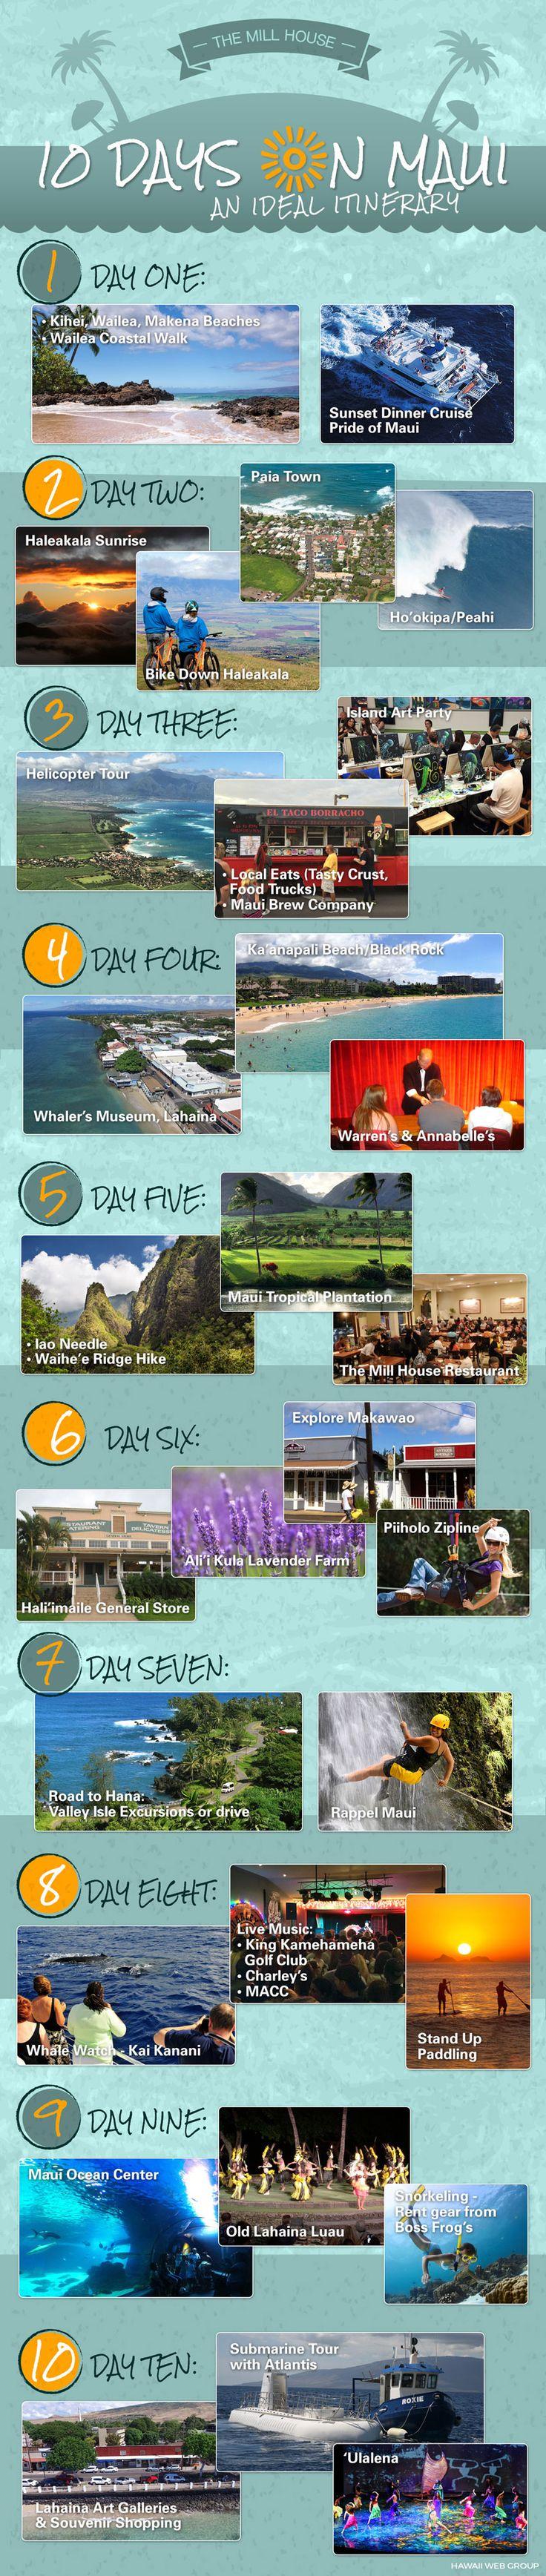 Wedding - 10 Day Maui Itinerary - Each Days Fun Outlined